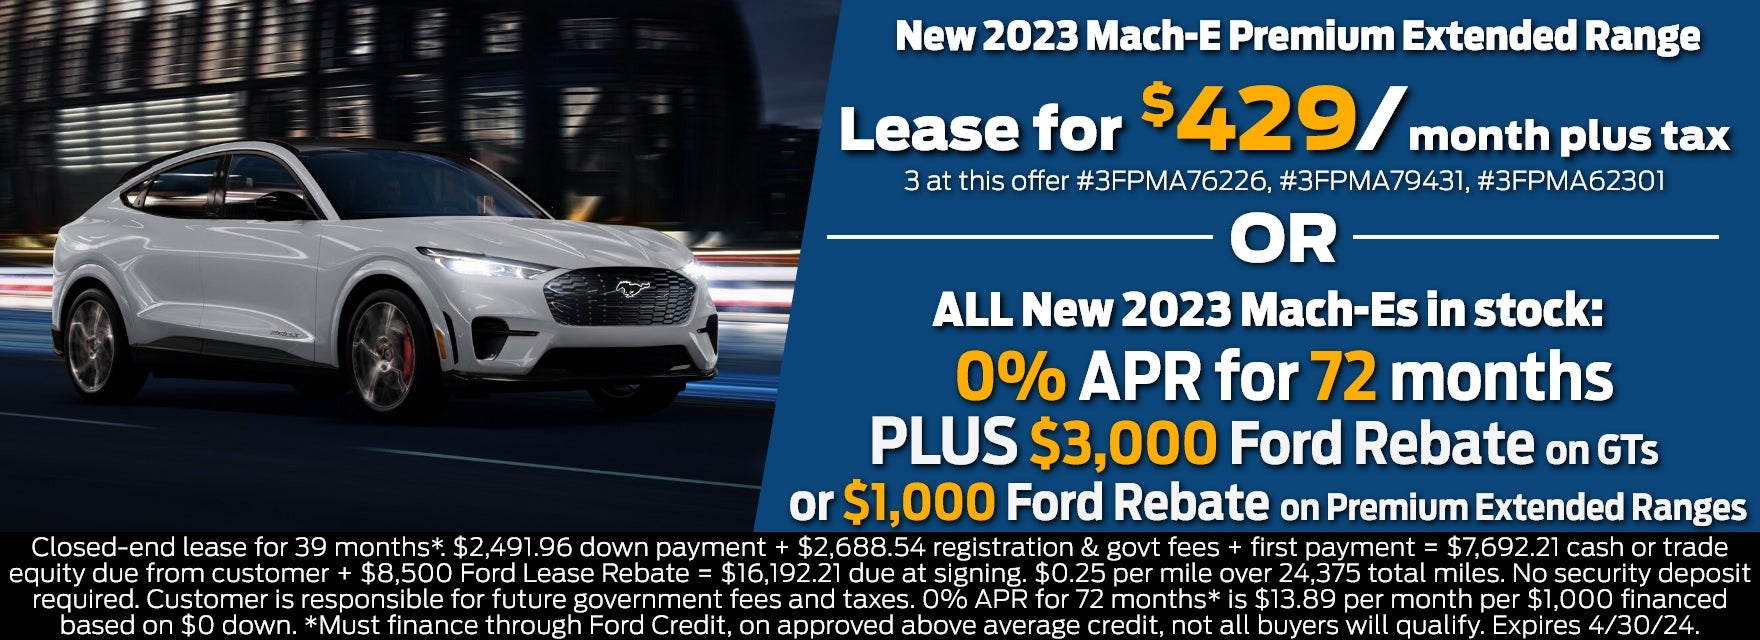 New 2023 Mach-E Premium Extended Range Lease for $429/month